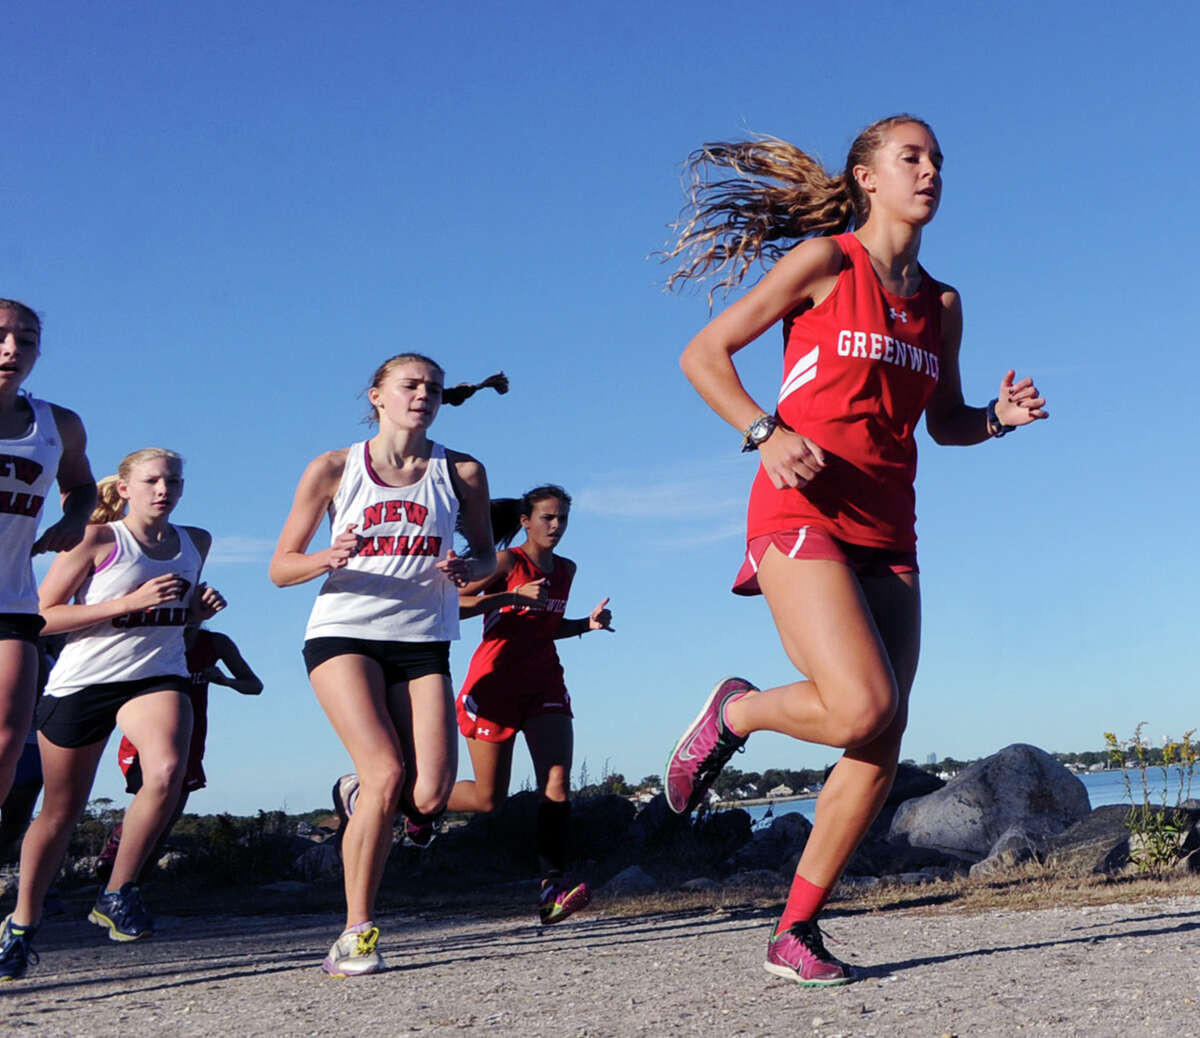 Sabrina Thurber of Greenwich, right, in action during a girls high school cross country meet at Greenwich Point Tuesday. Thurber finished the meet in first place.